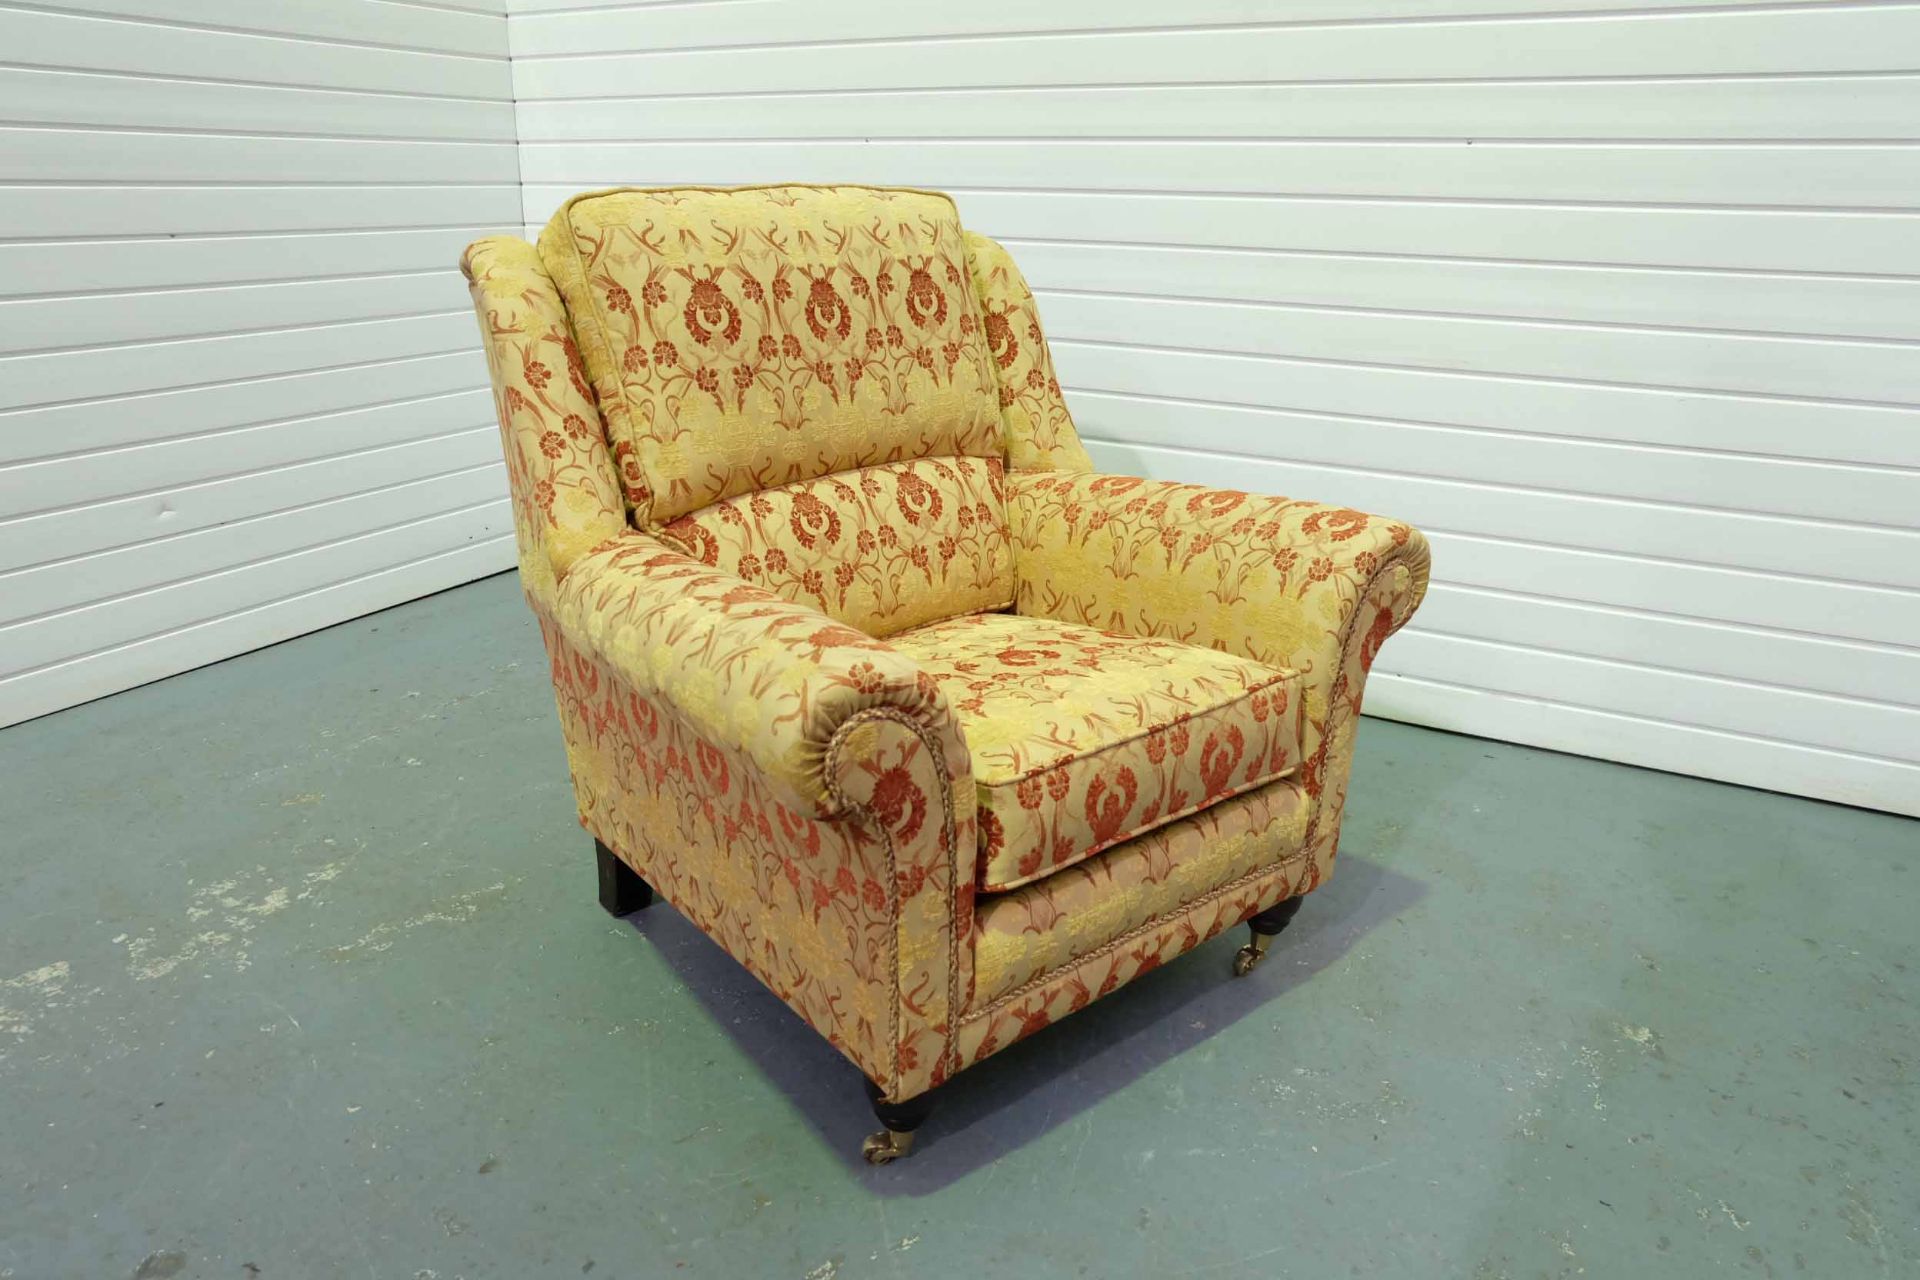 Steed Upholstery 'Lincoln' Range Fully Handmade Chair. Castor Wheels to the Front of the Chair. In - Image 3 of 3